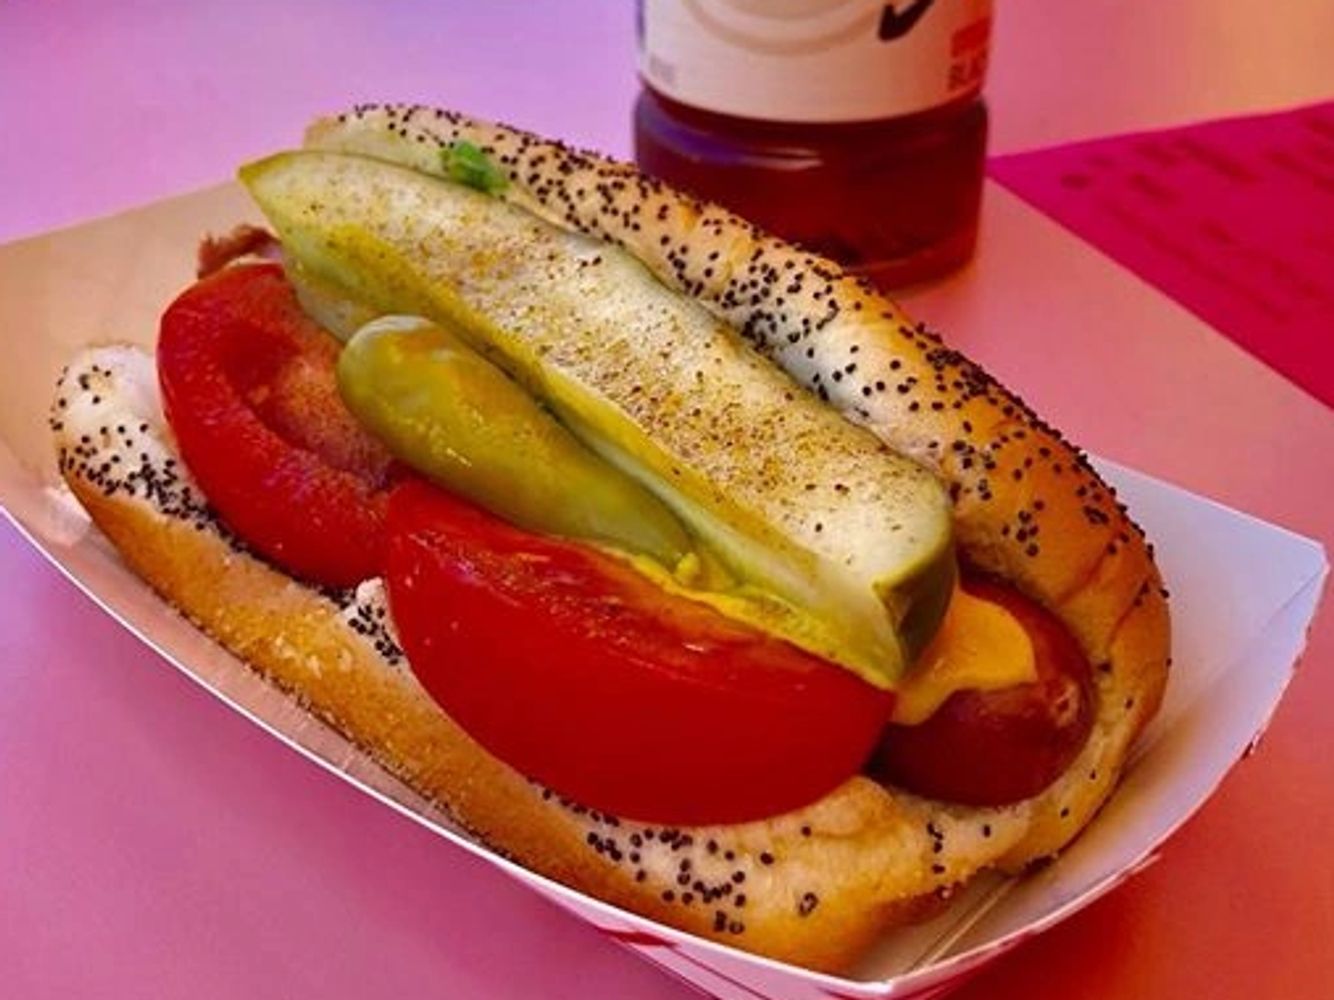 Authentic Chicago Dog made with Vienna Beef or your choice of dogs. Yellow mustard, atomic relish, d